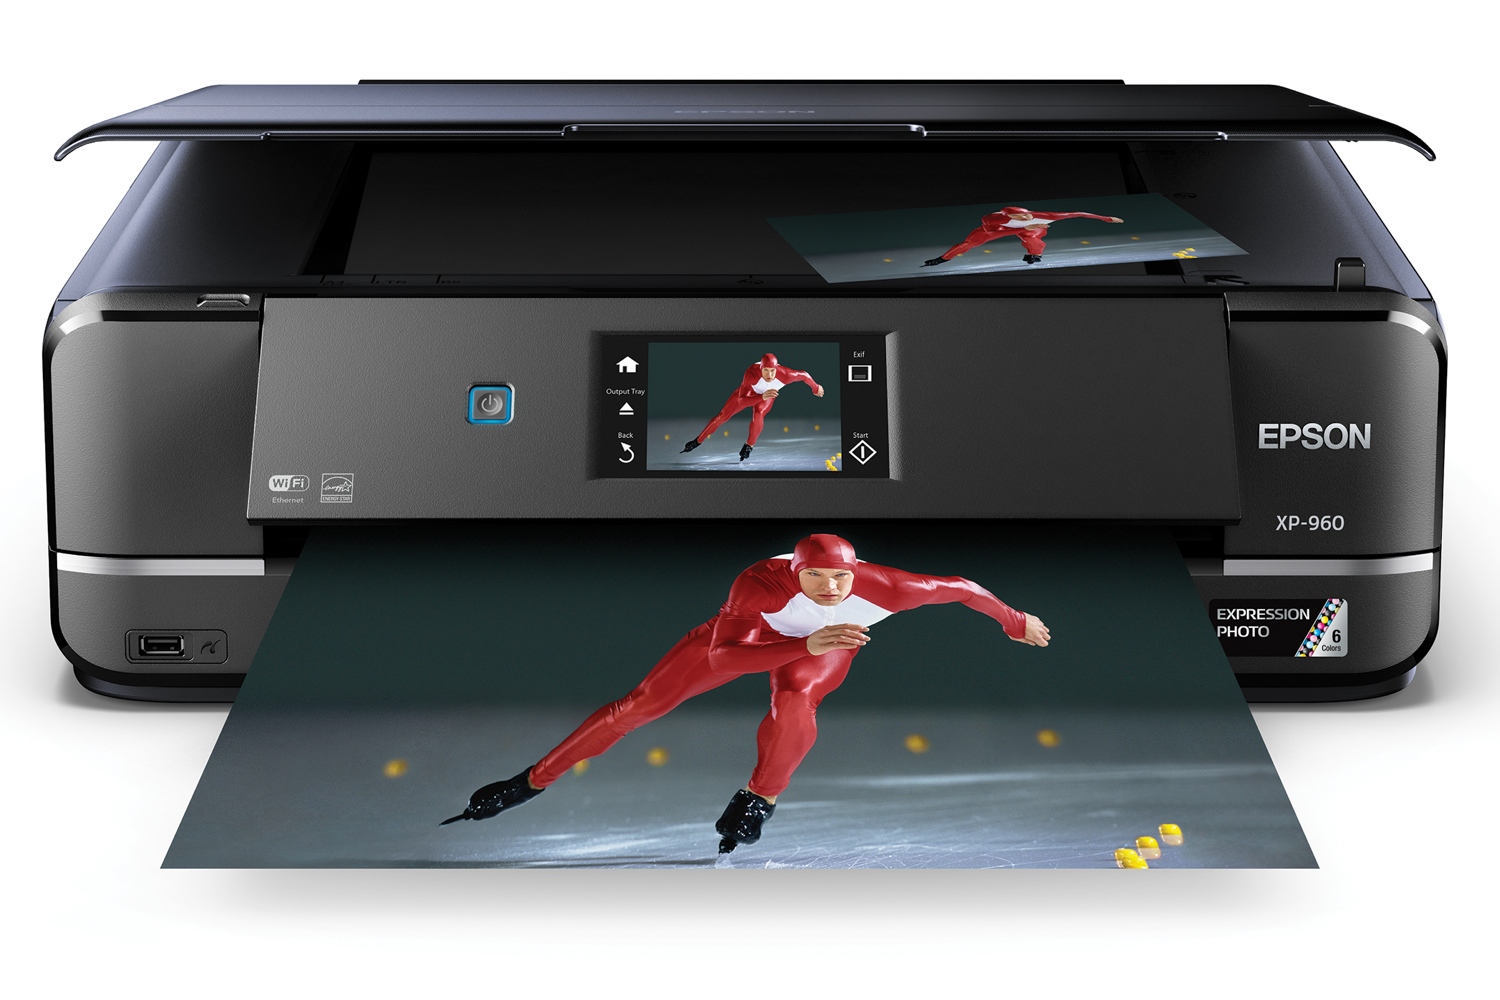 epsons updated expression home photo printers include wide format model epson xp 960 front view